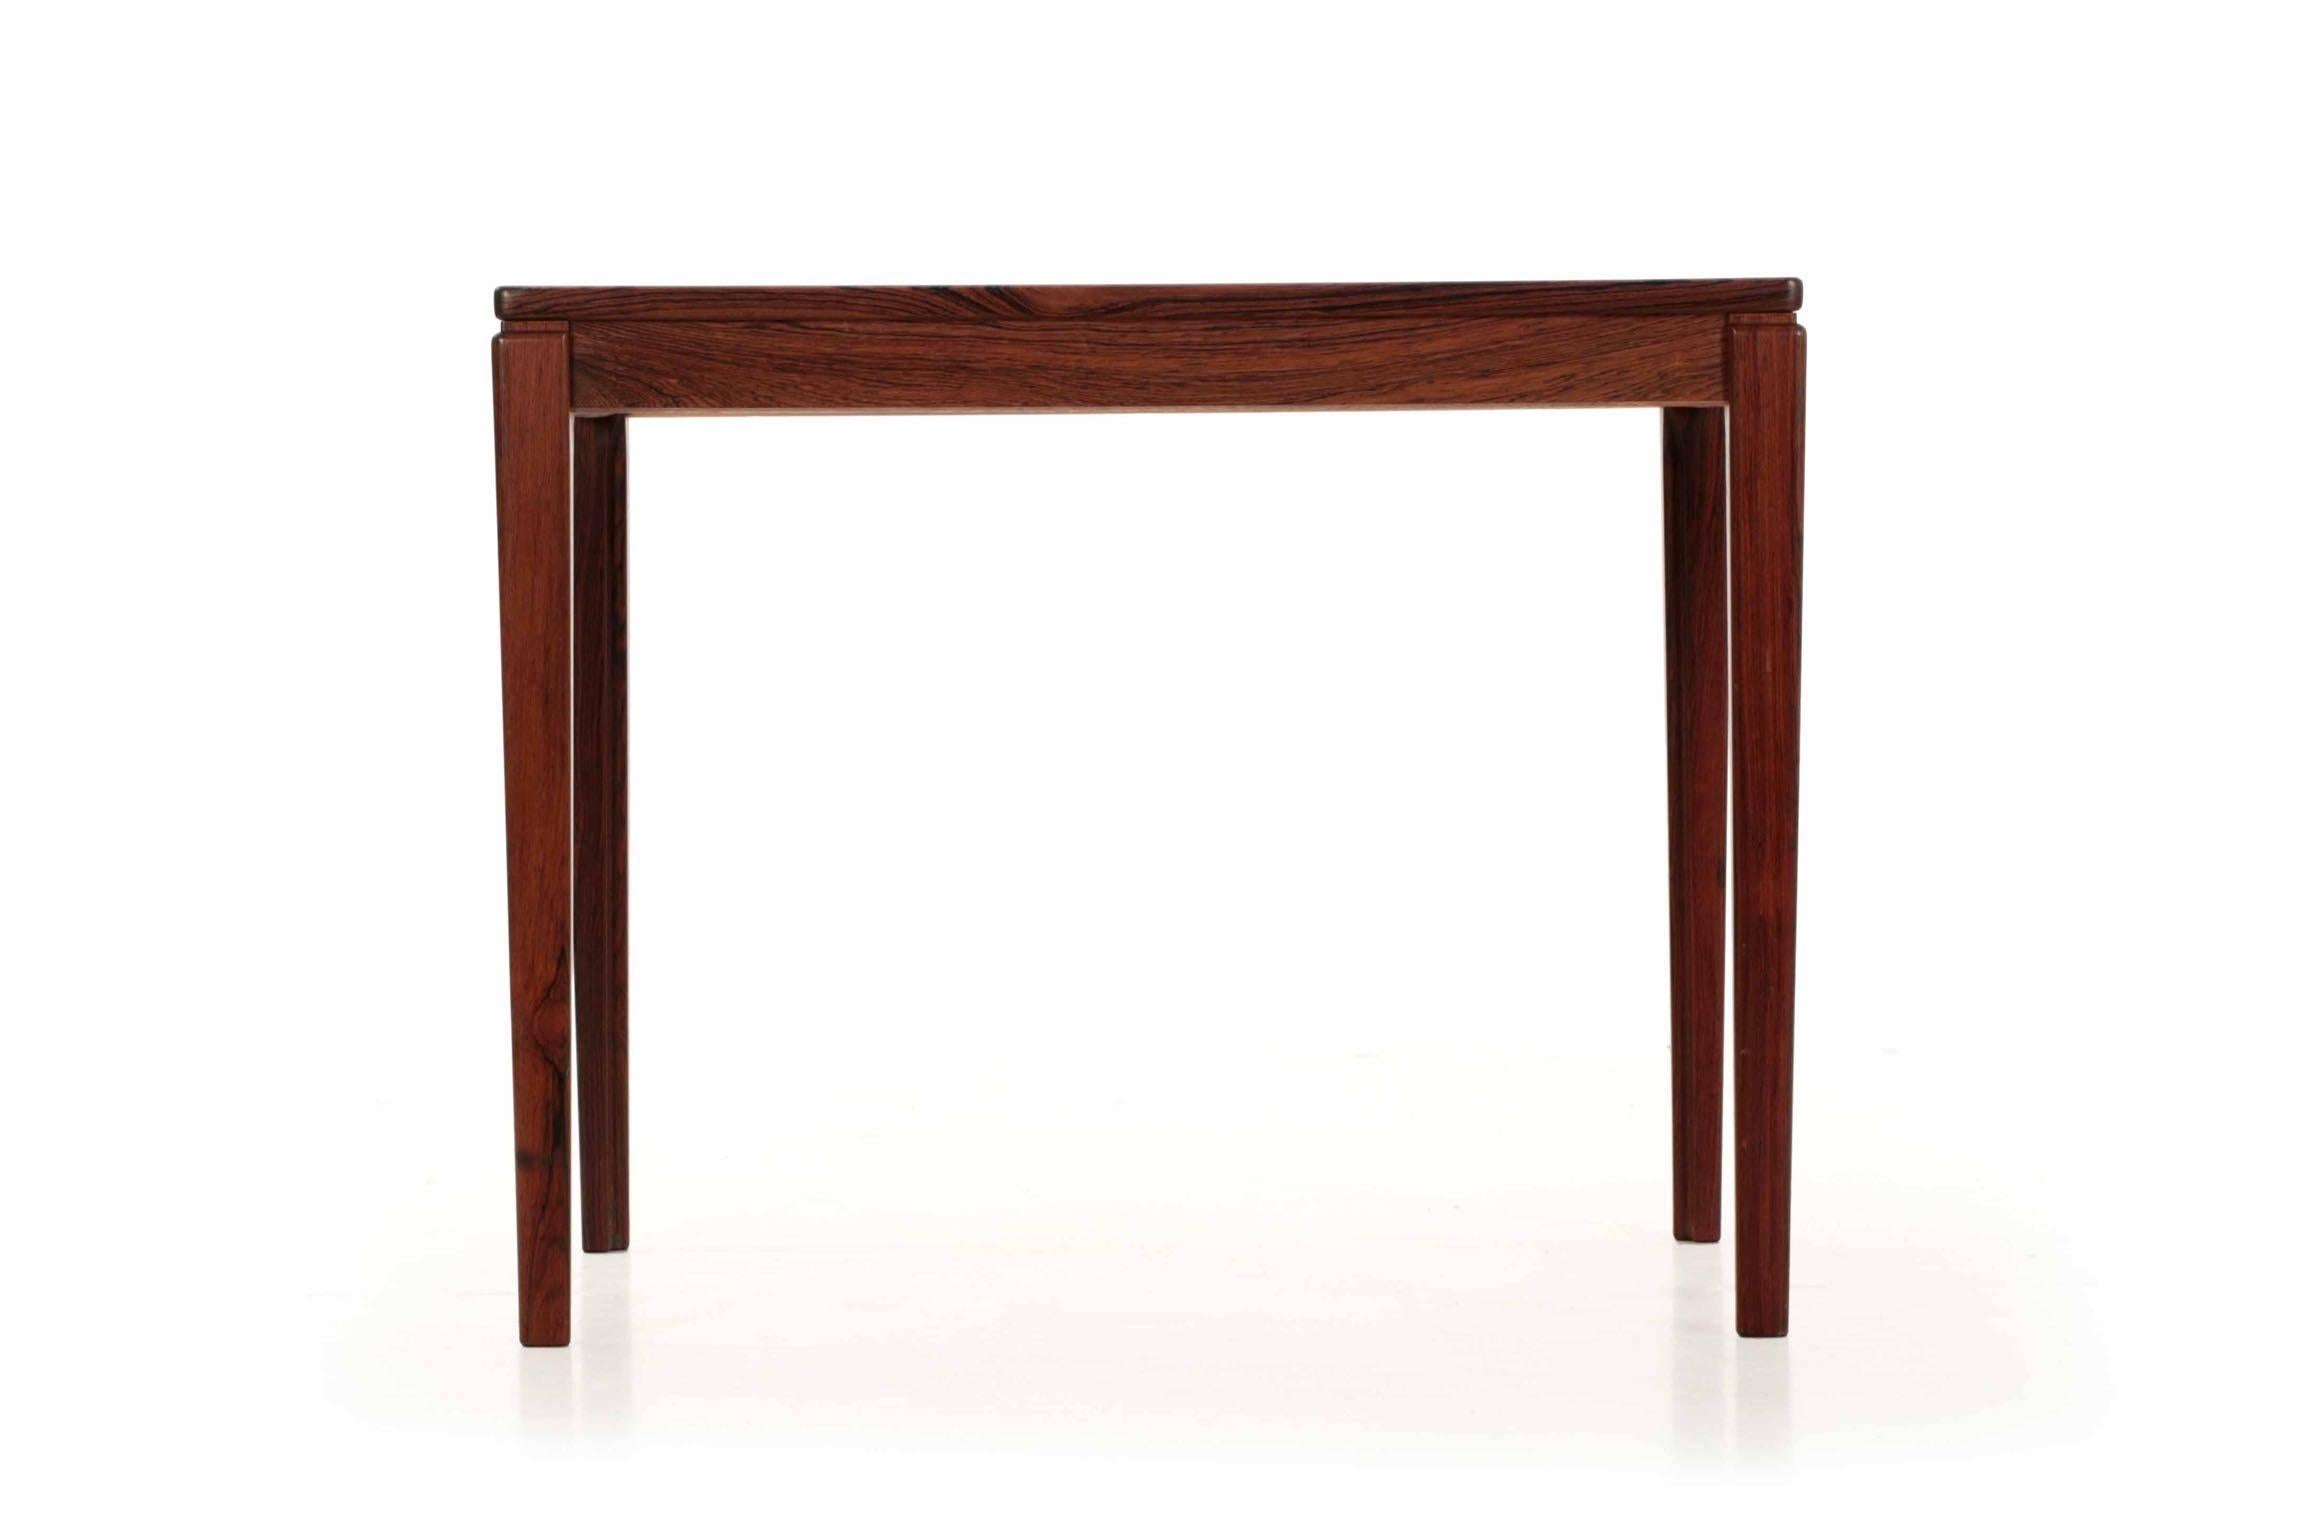 This most attractive rosewood veneered side table was manufactured by Ulferts Møbler of Sweden; it remains in outstanding condition with vibrant color in the chaotic grain of rosewood. The legs are beautifully tapered with a routed inner corner and